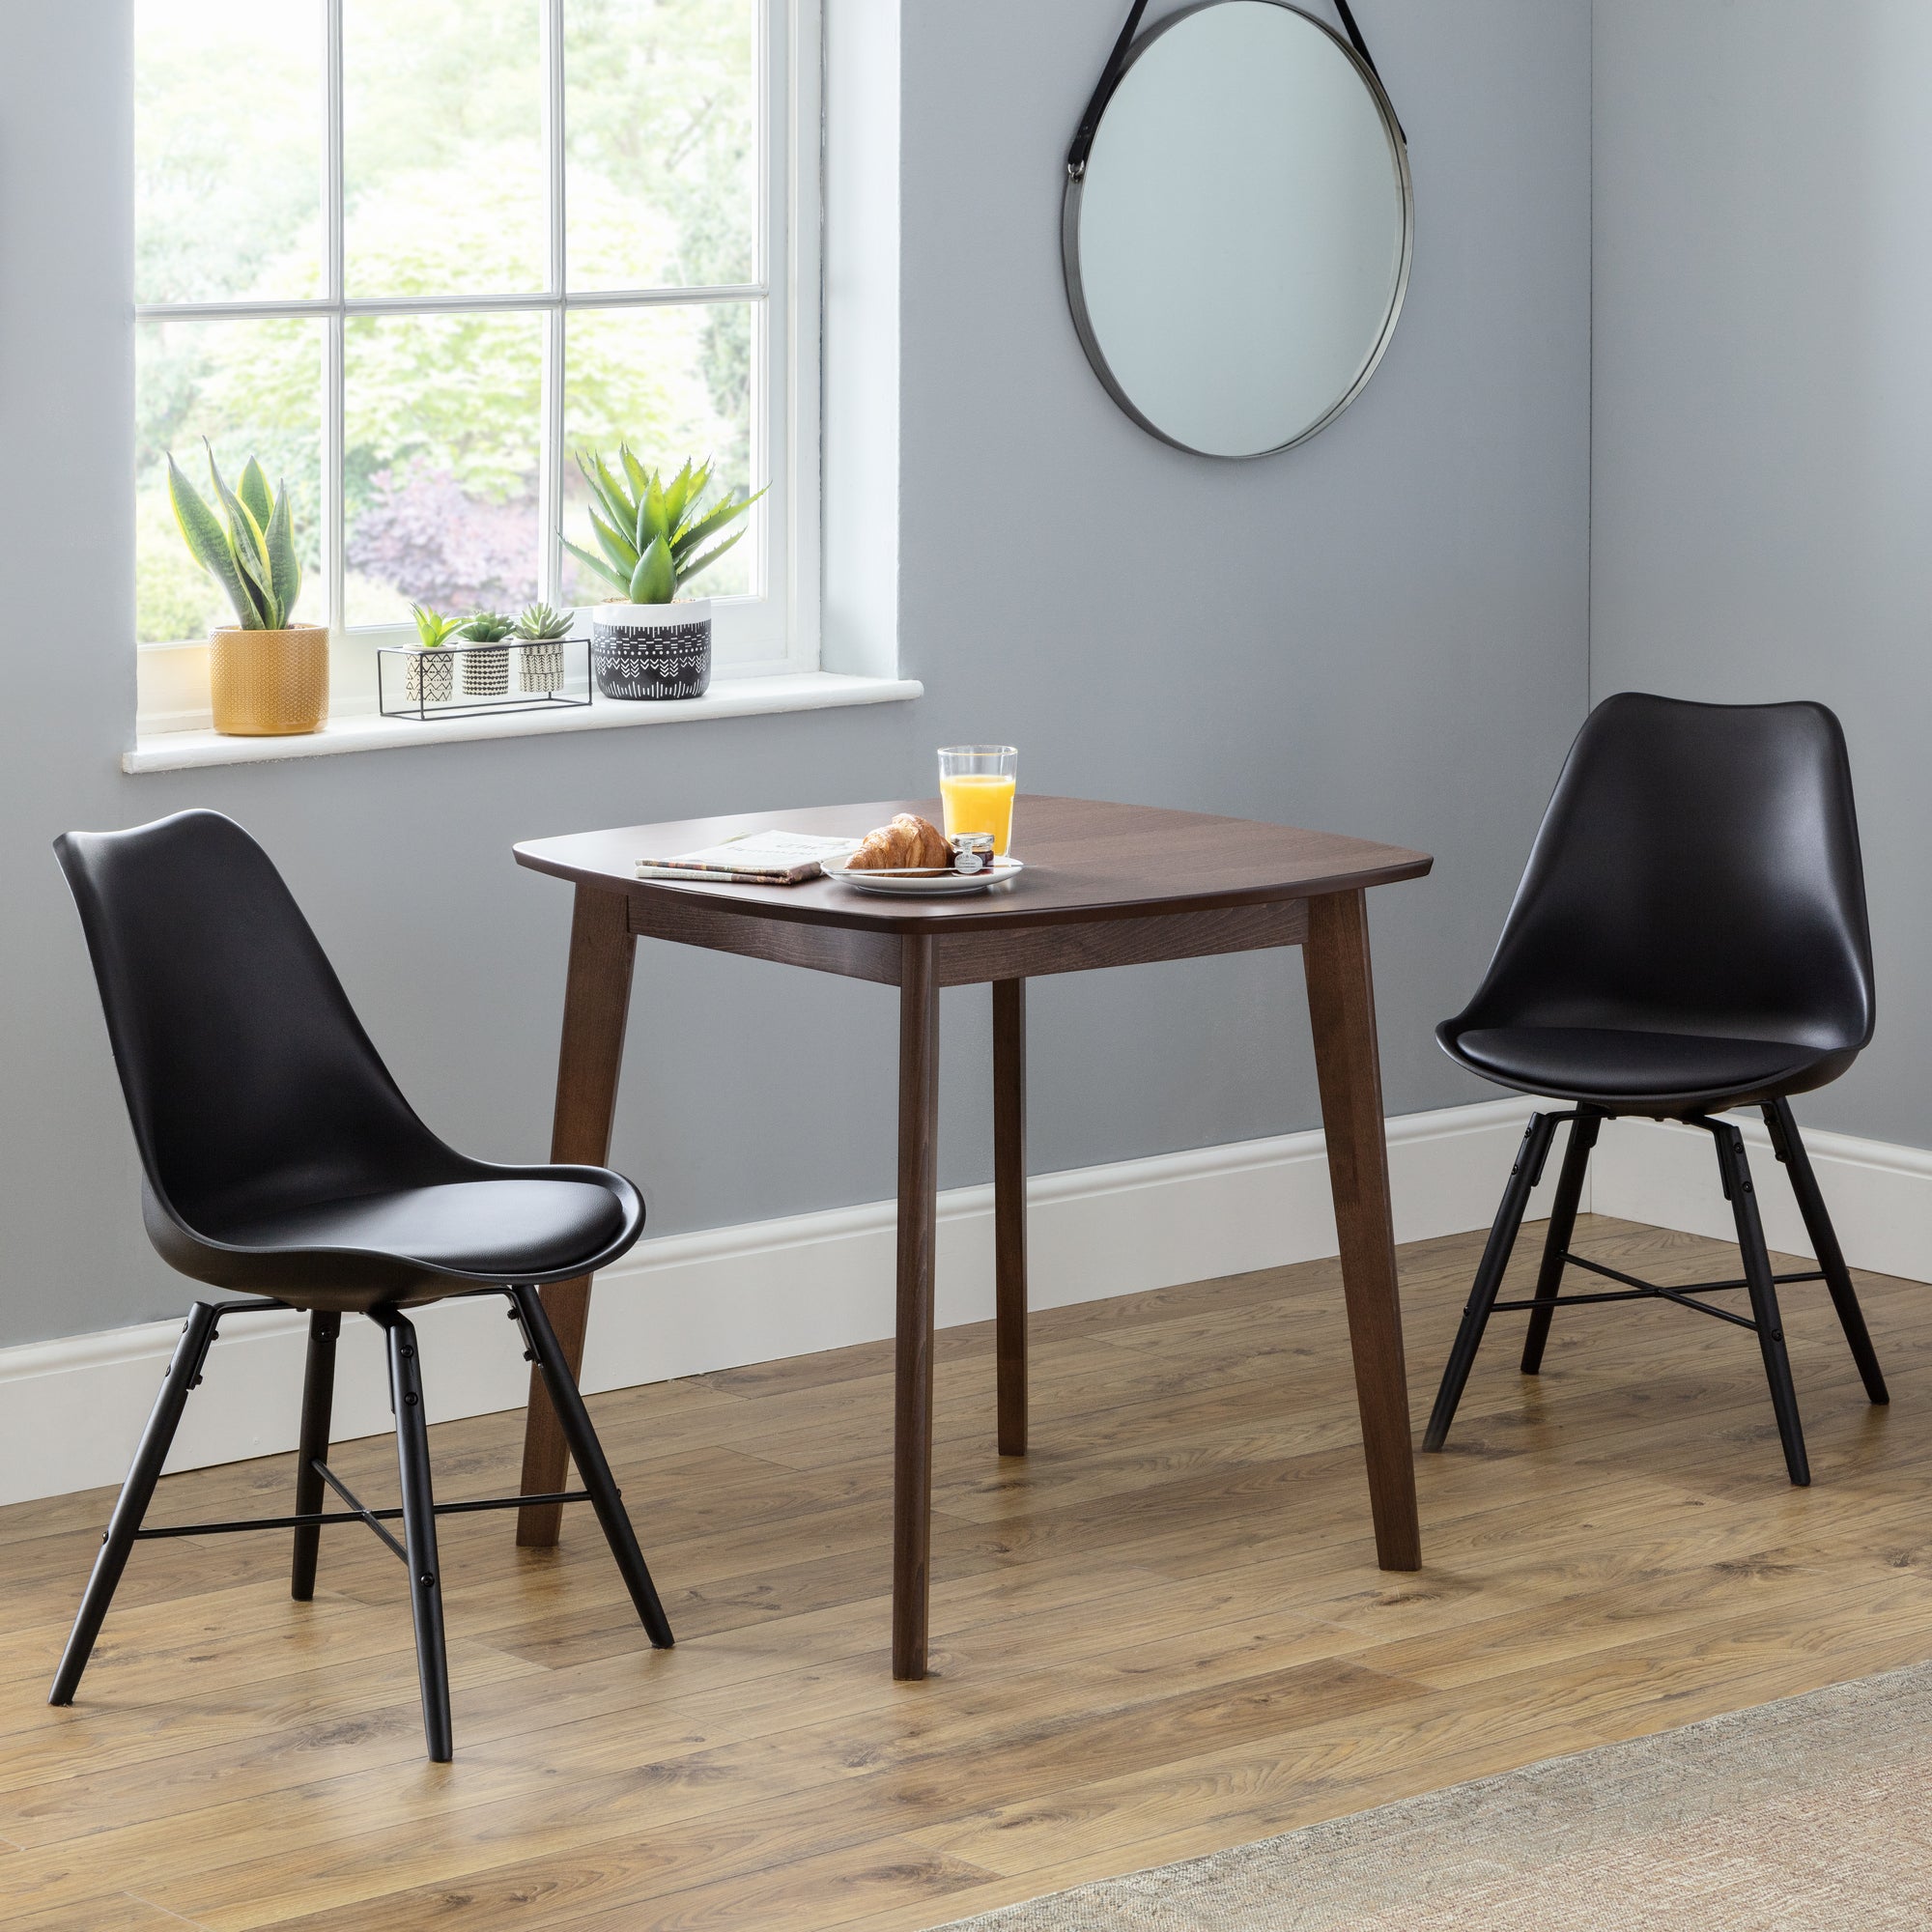 Lennox Square Dining Table with 2 Kari Chairs, Beech Wood